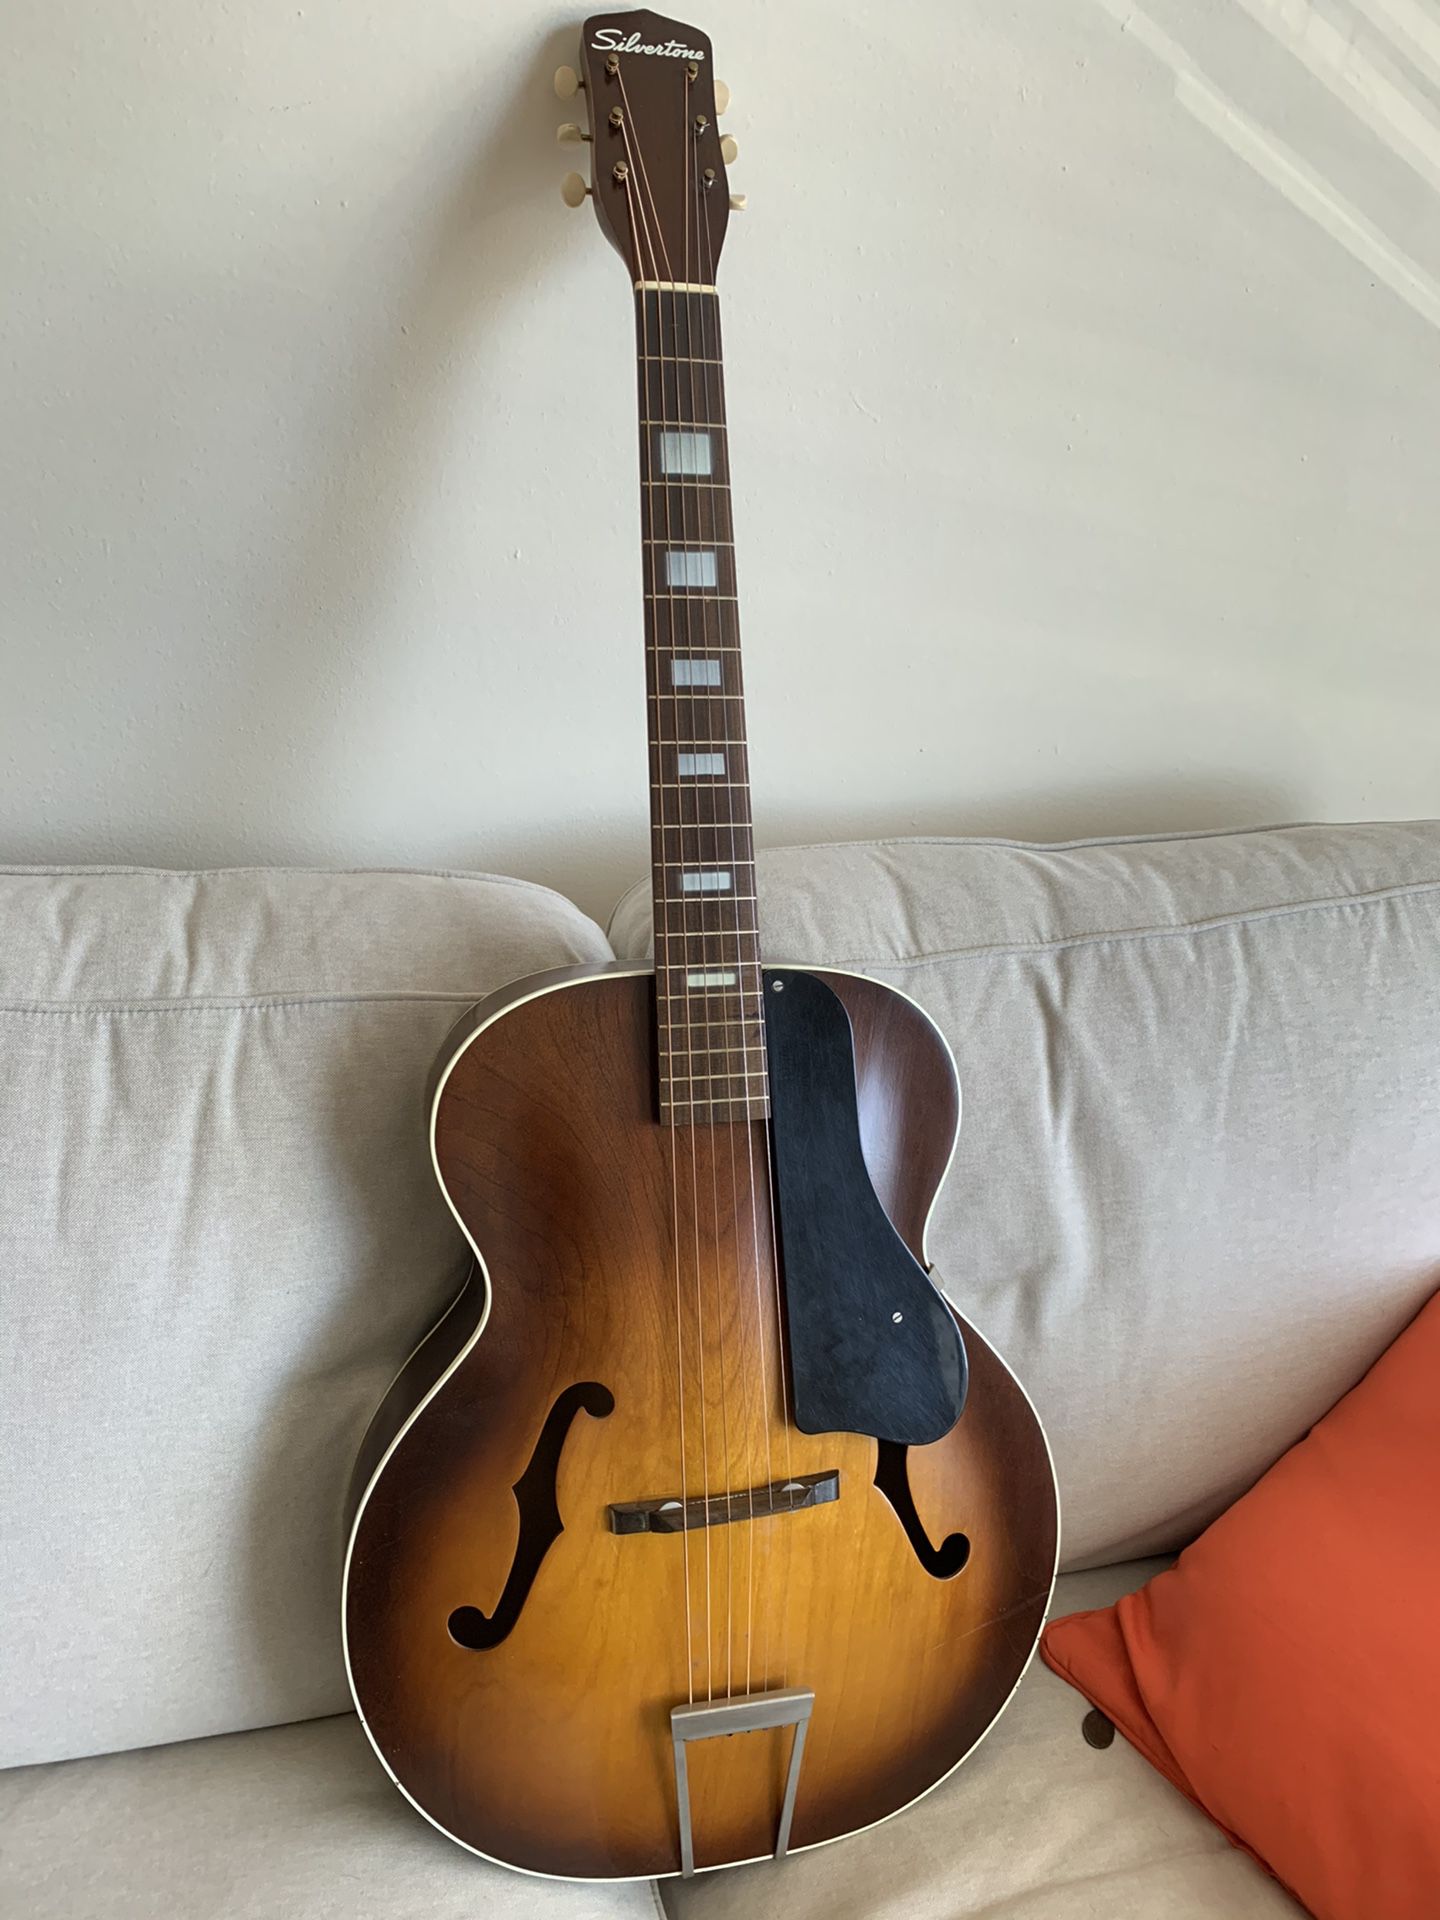 Early 60s Silvertone 612 Archtop Acoustic Guitar